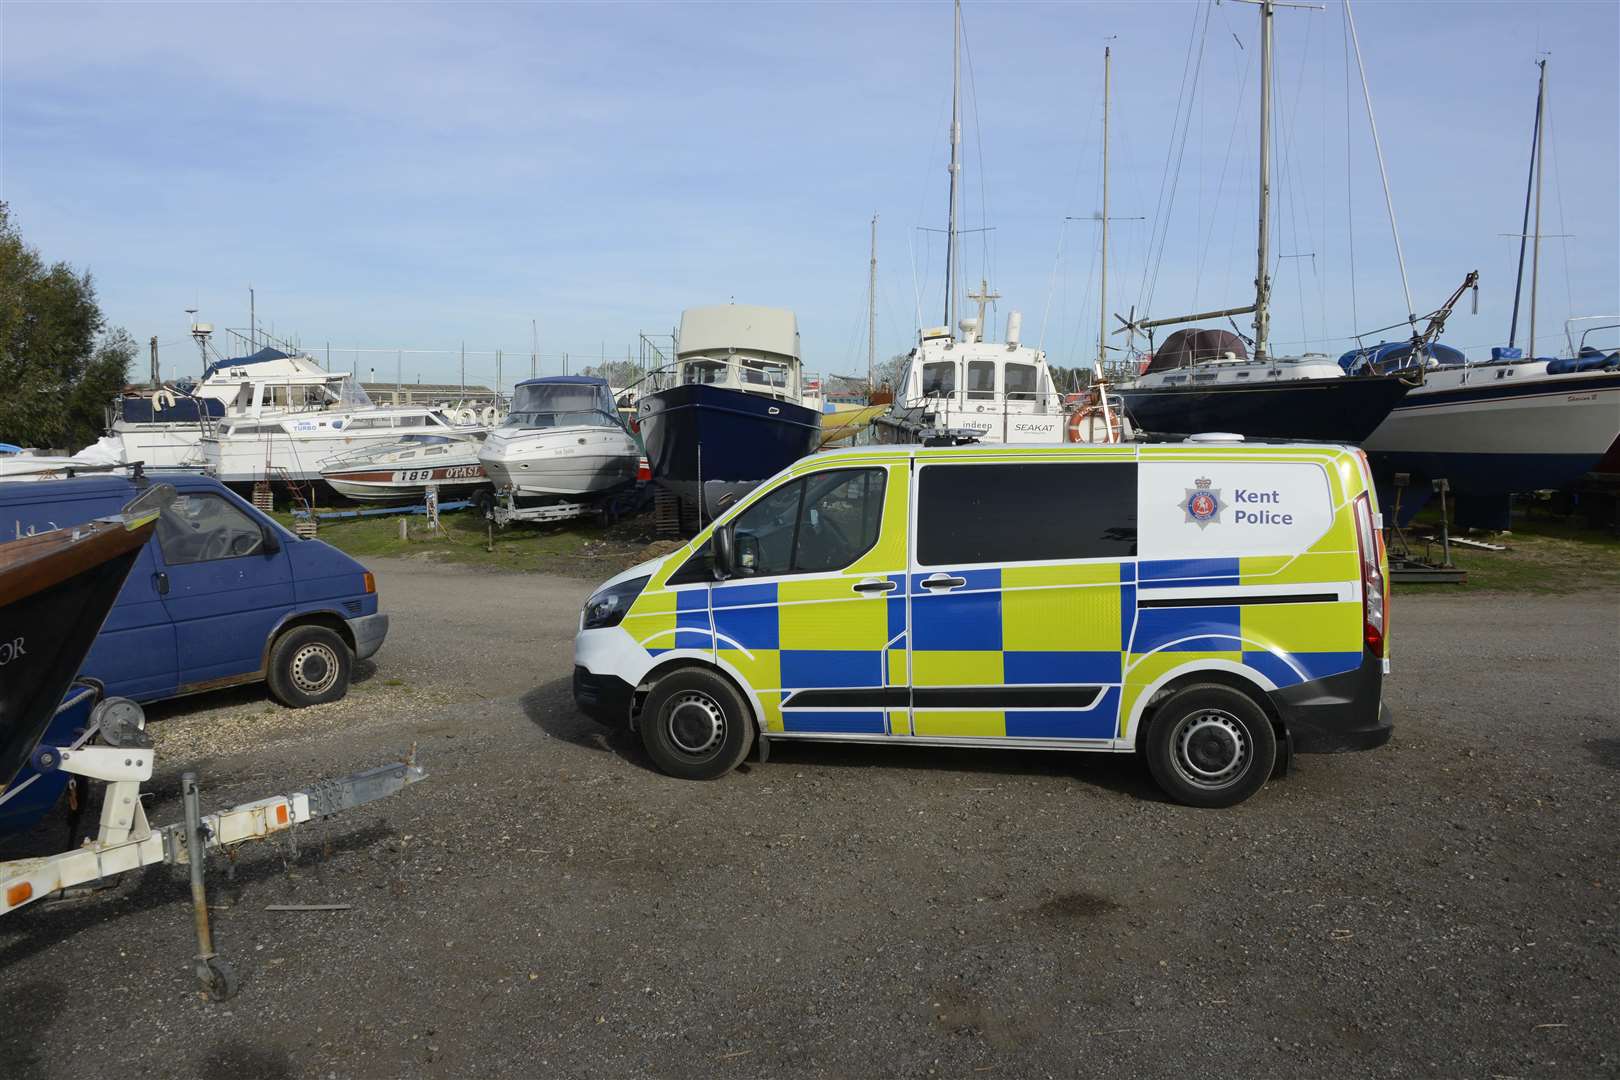 Police escorted the jury on their visit to the marina